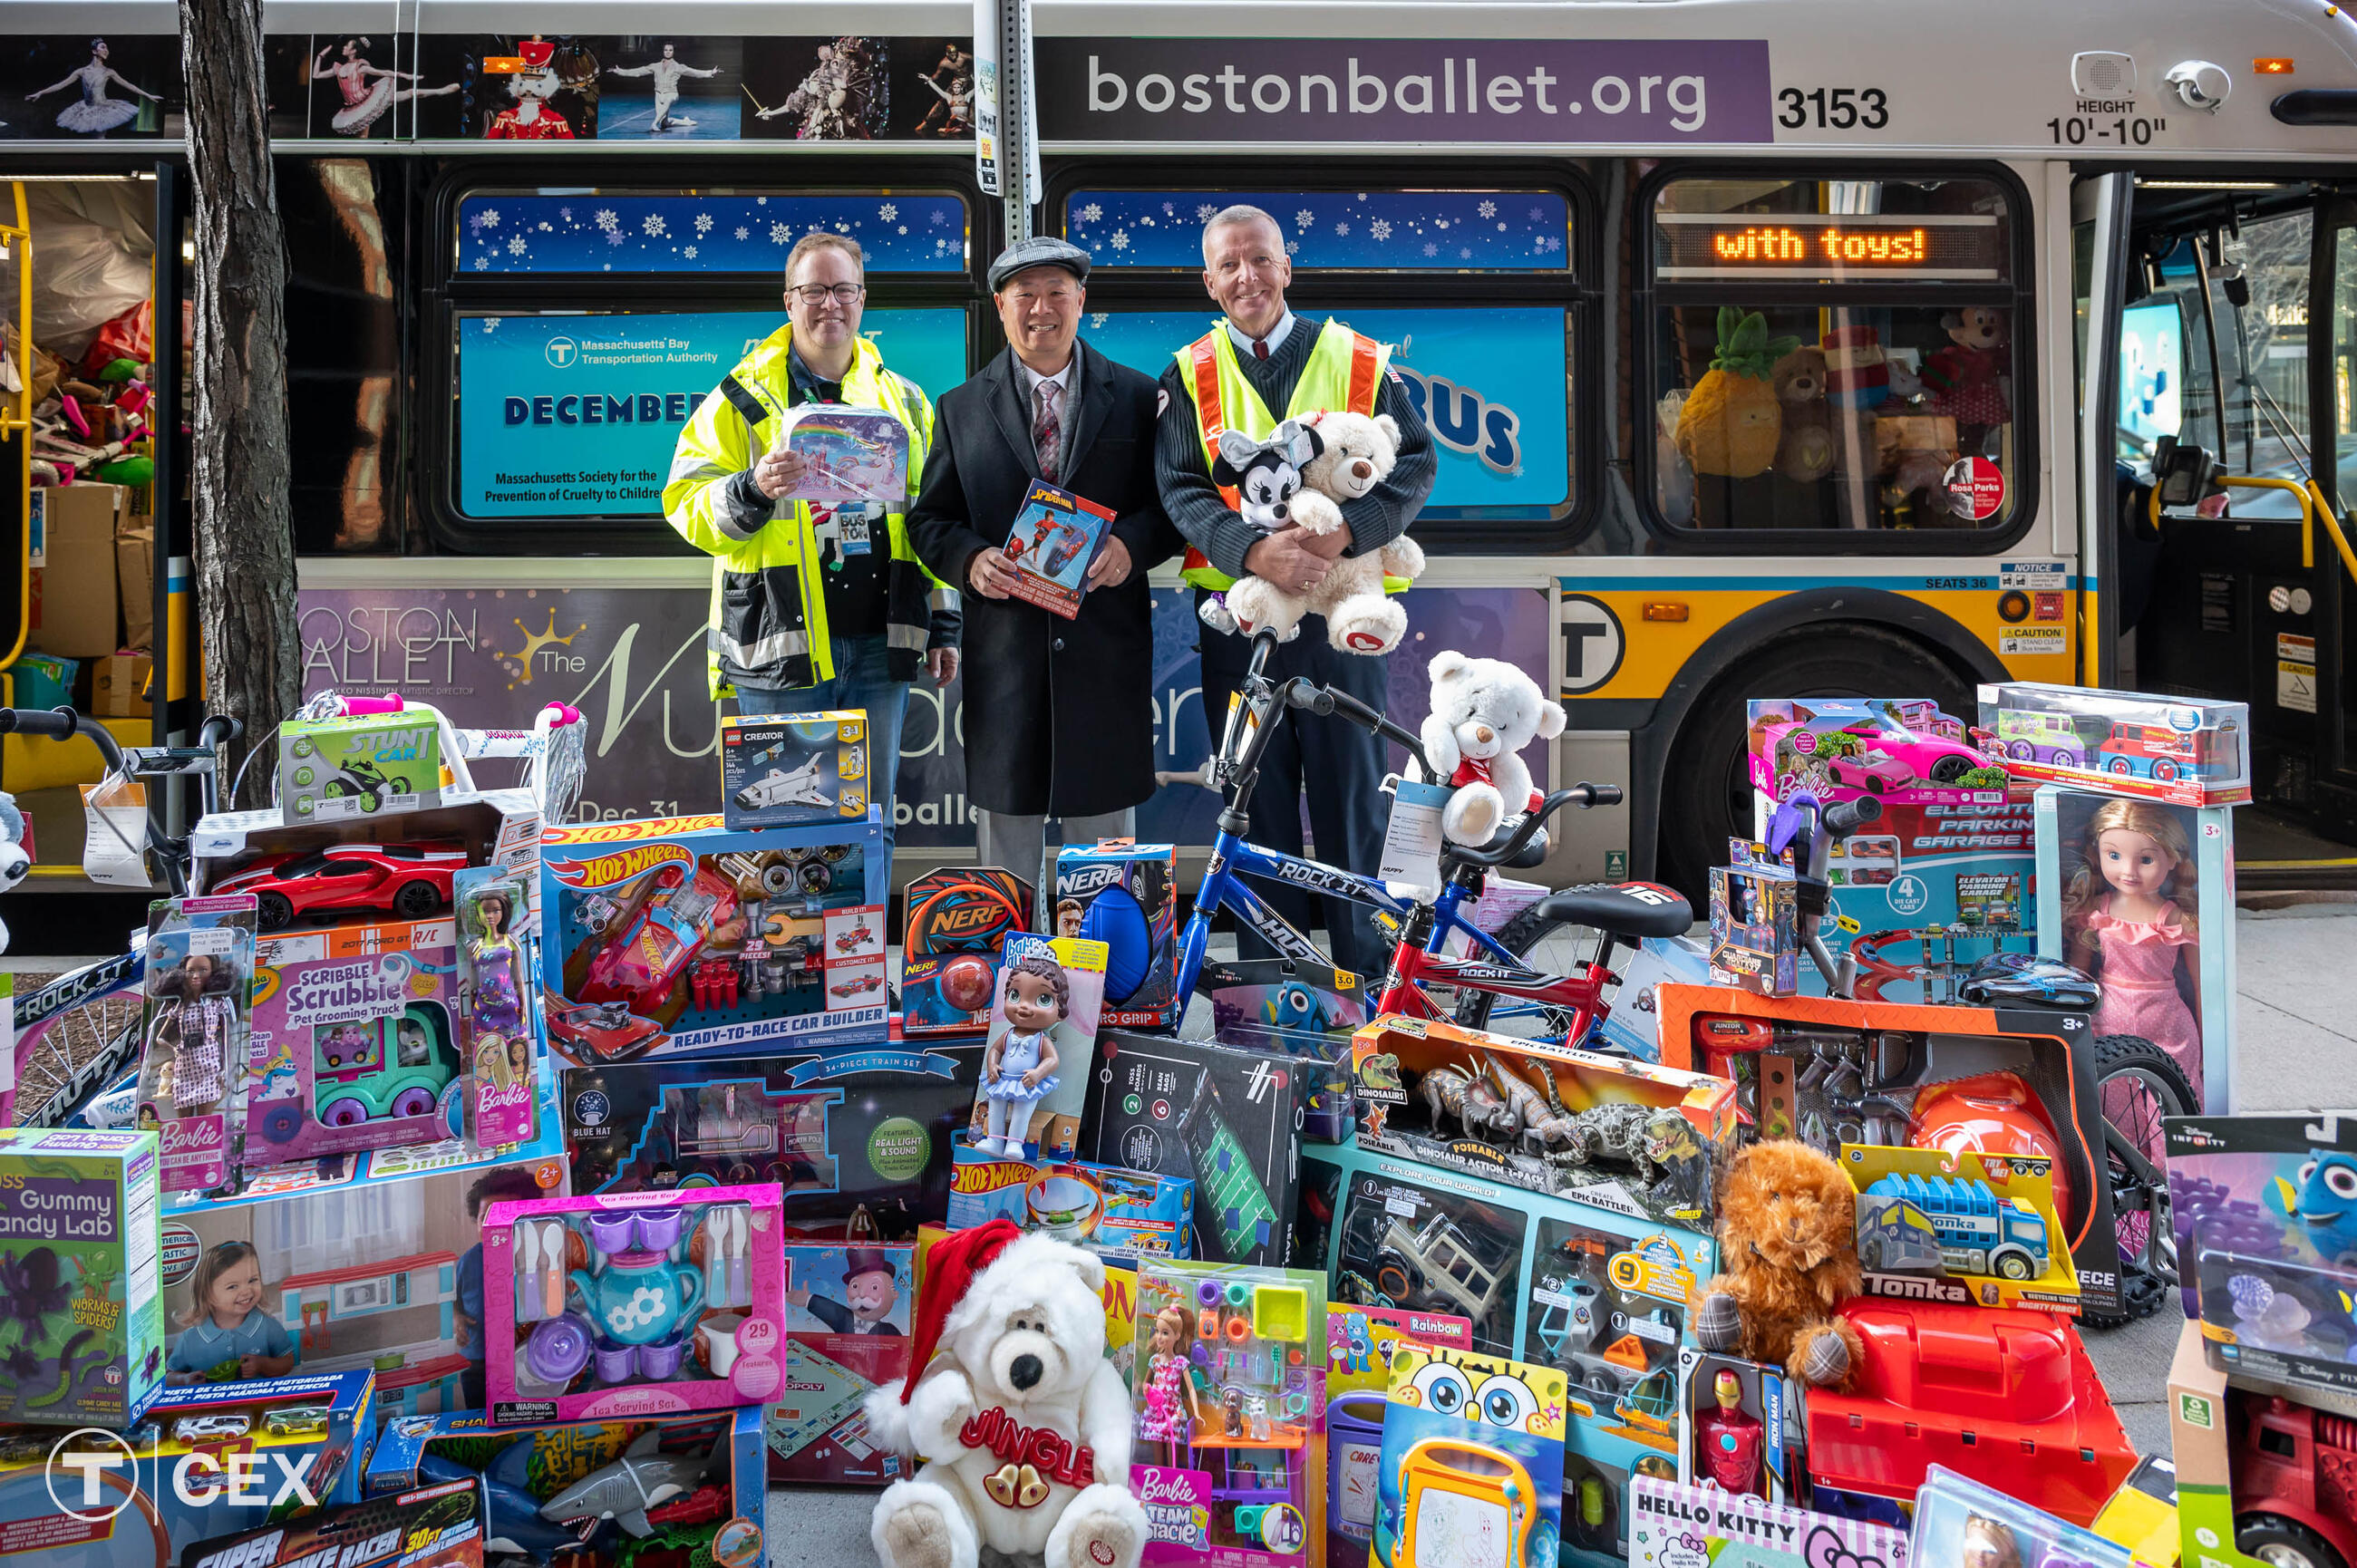 Left to Right: MBTA Graphics Manager David Wood, who has organized the Fill-A-Bus with Gifts event for the last six years; MBTA General Manager and CEO Phillip Eng; and MBTA Bus Operator Mike Broderick, who drives the holiday bus route each year.